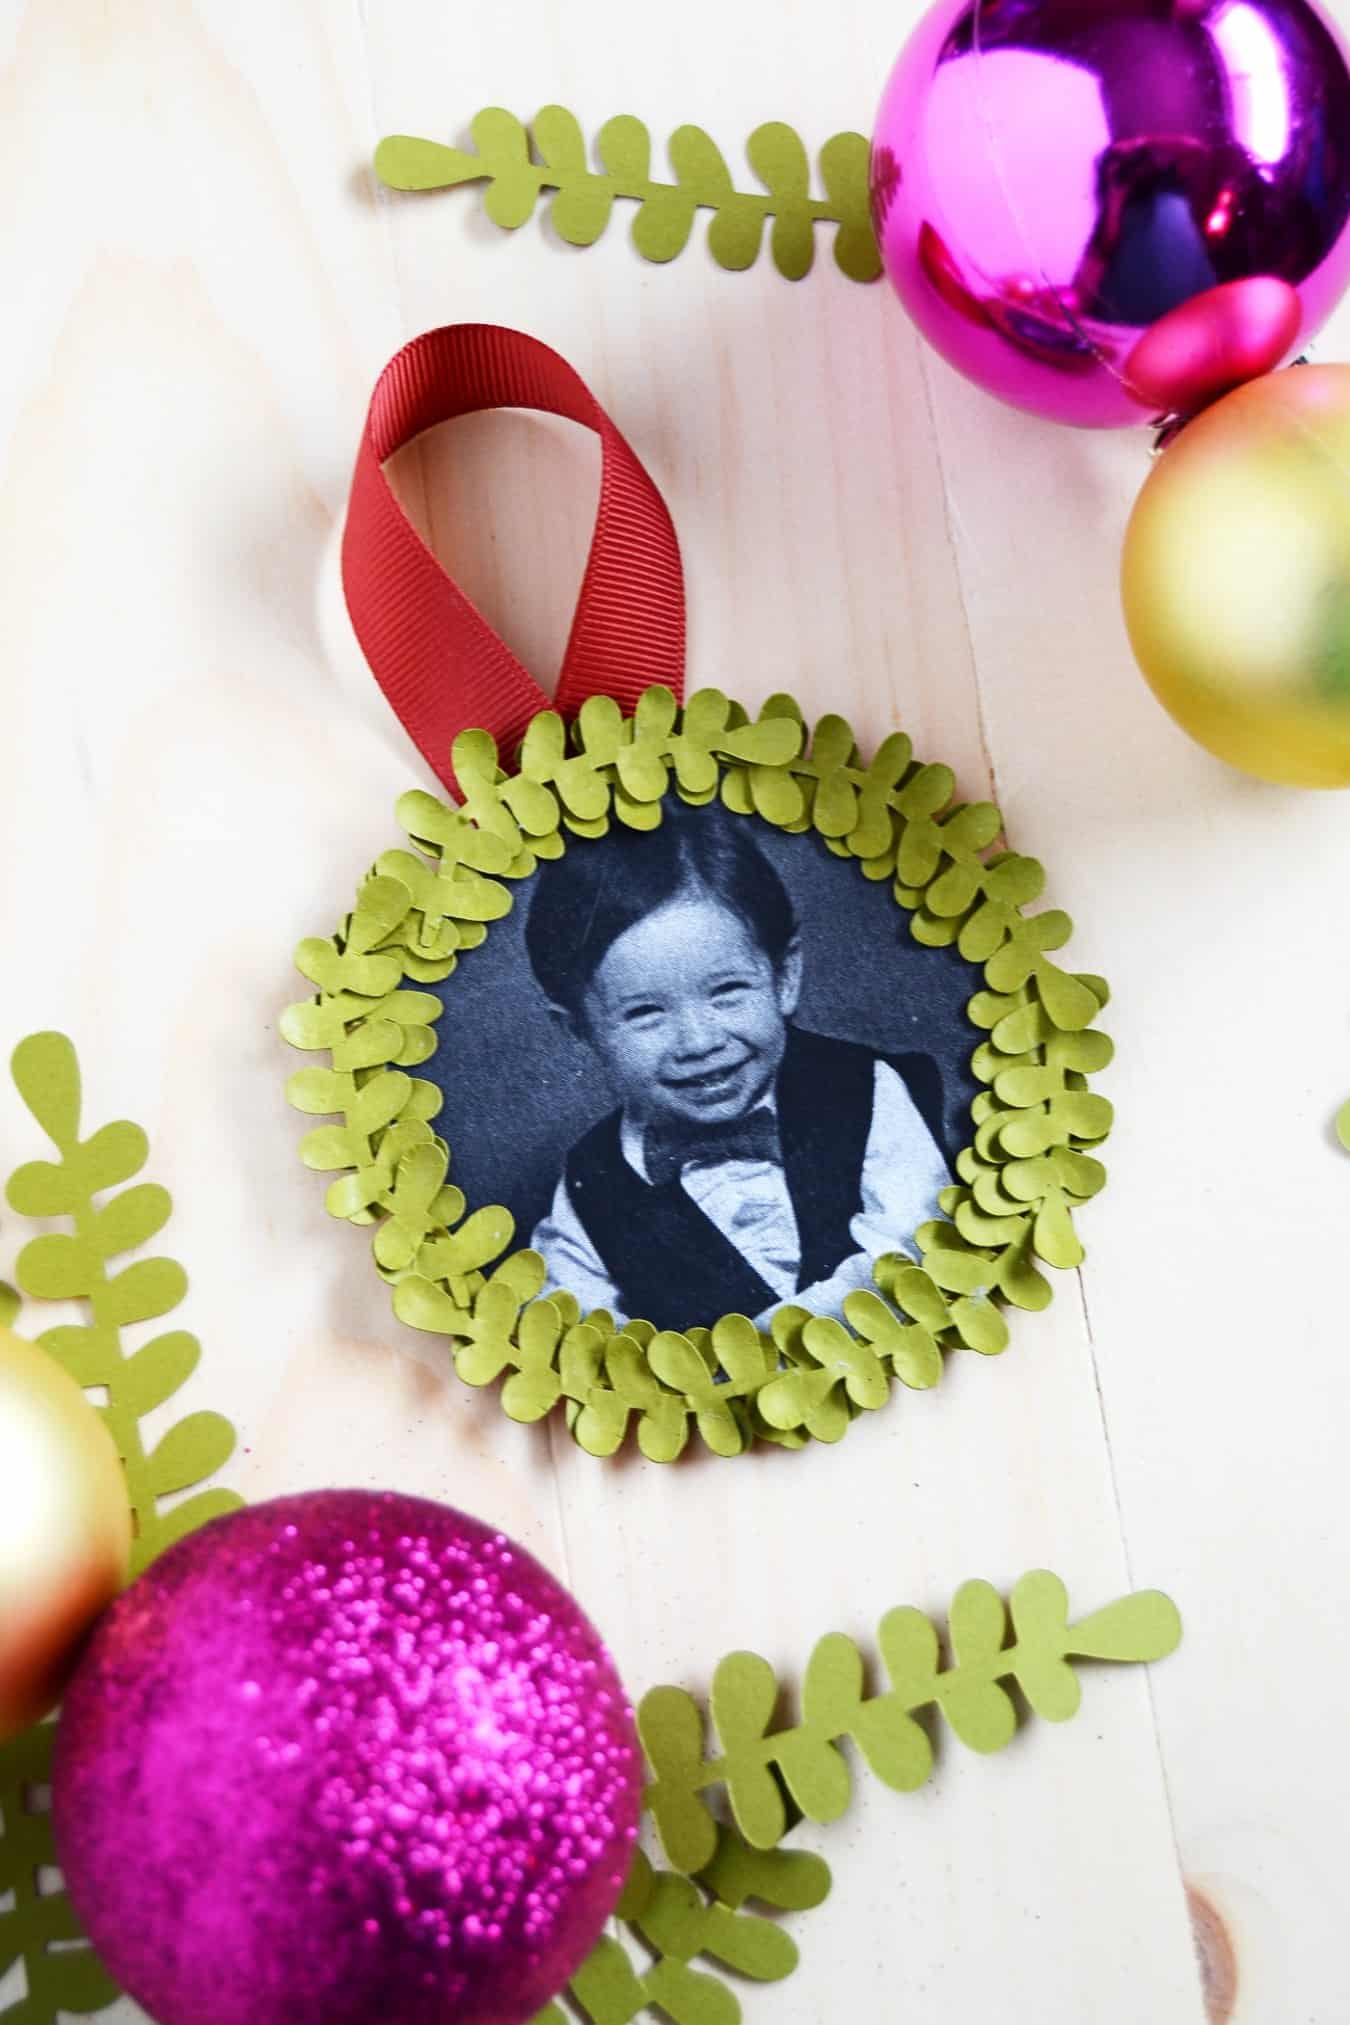 This mini wreath photo ornament is so easy to make! It's the perfect little gift for grandmas, moms and newlyweds to decorate their trees.